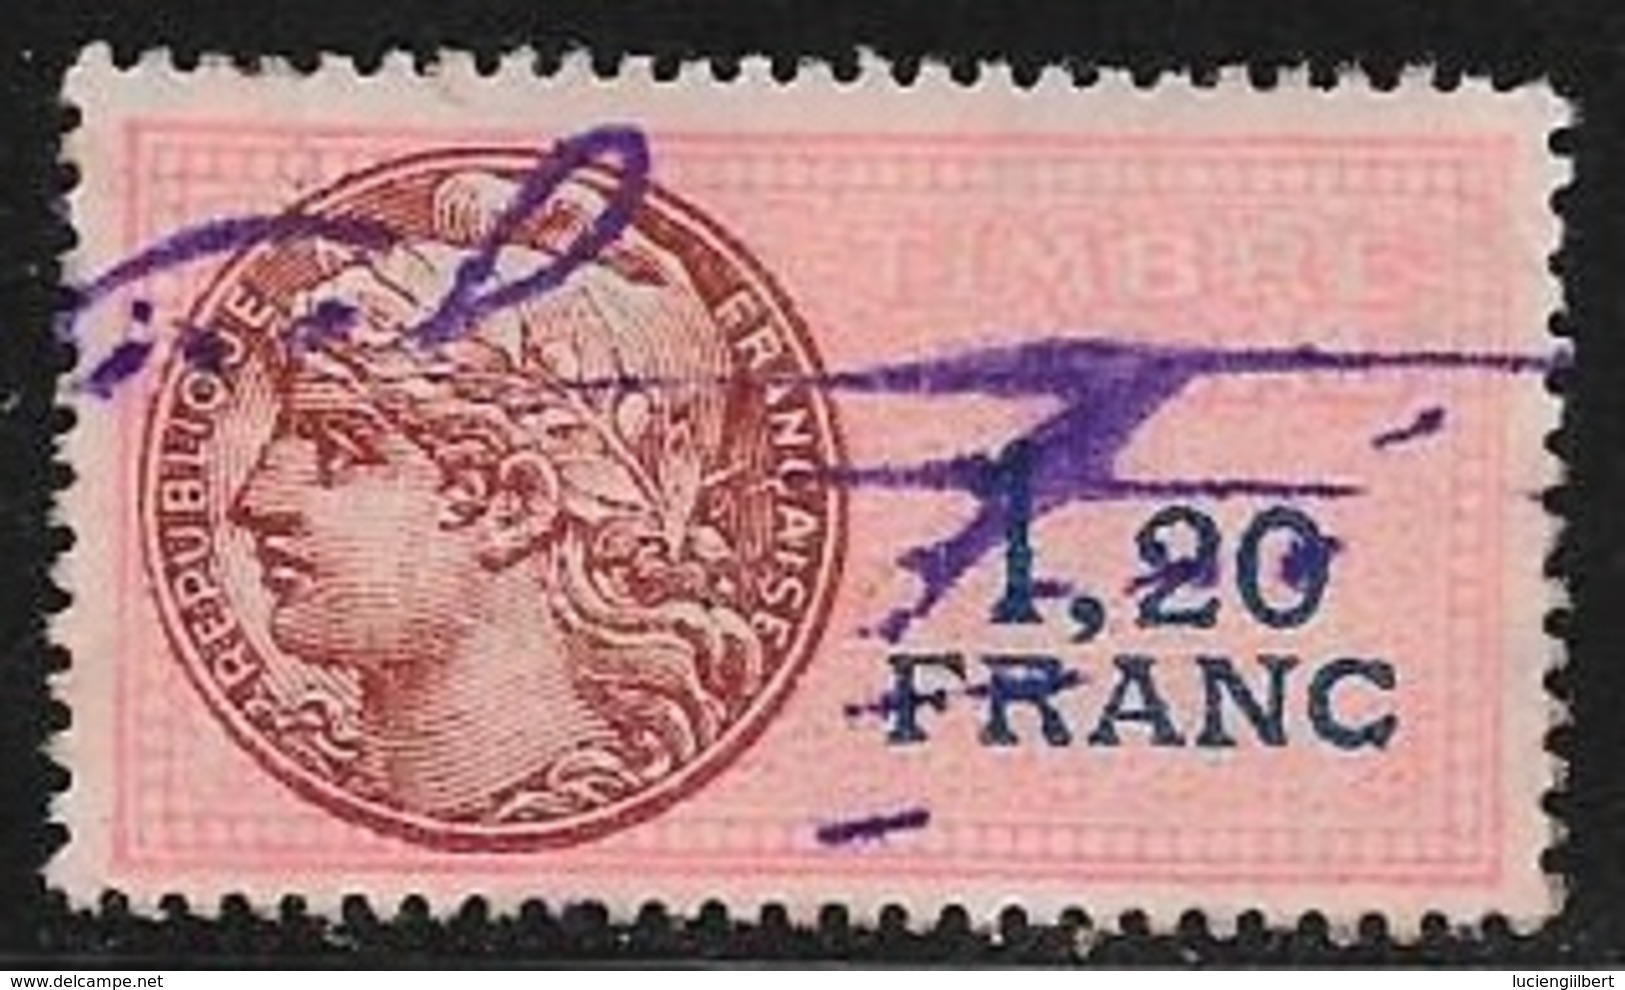 TIMBRE FISCAL N° 121  -  1 F 20   BLEU SUR ROUGE  -   MEDAILLON DAUSSY ETOILE  -   OBLITERE - Stamps